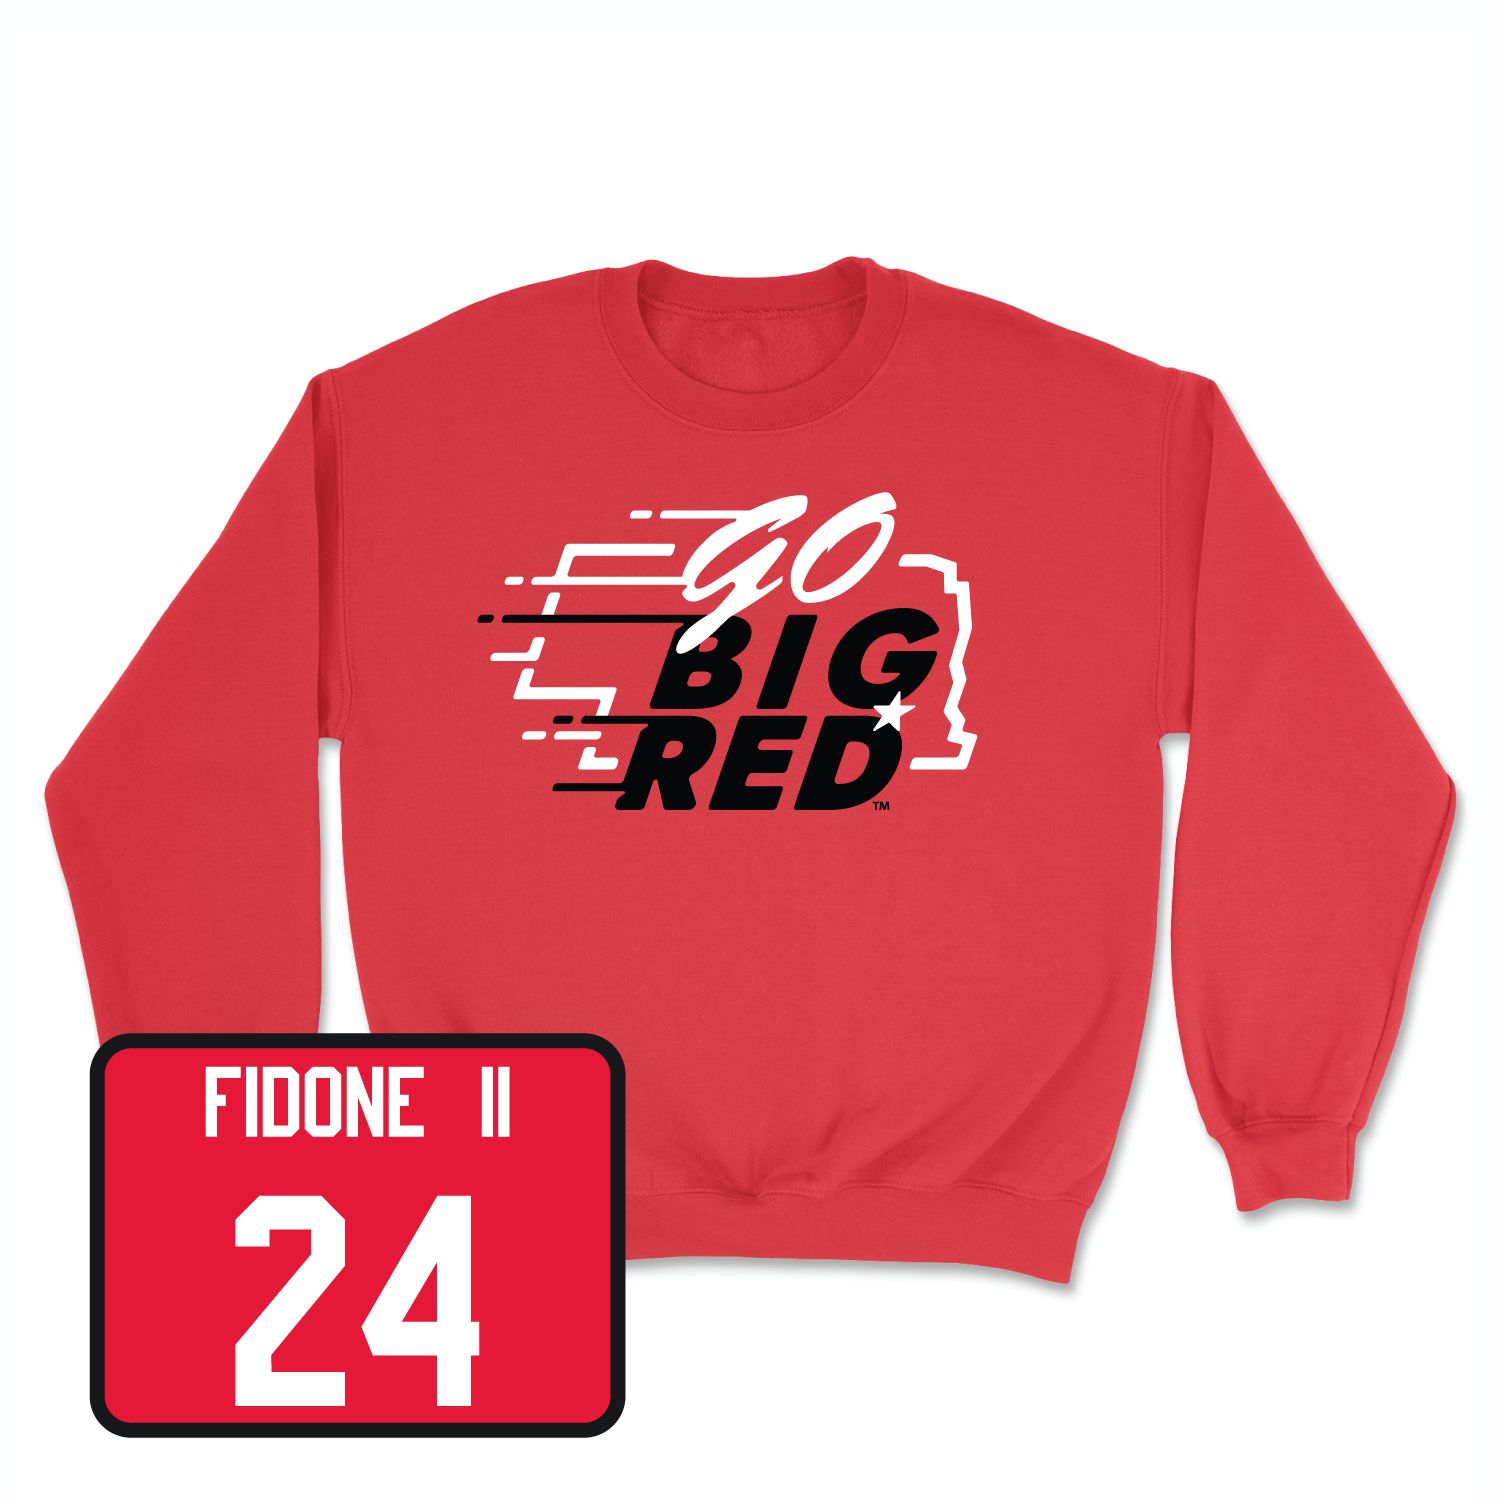 Red Football GBR Crew 3 Youth Large / Thomas Fidone II | #24